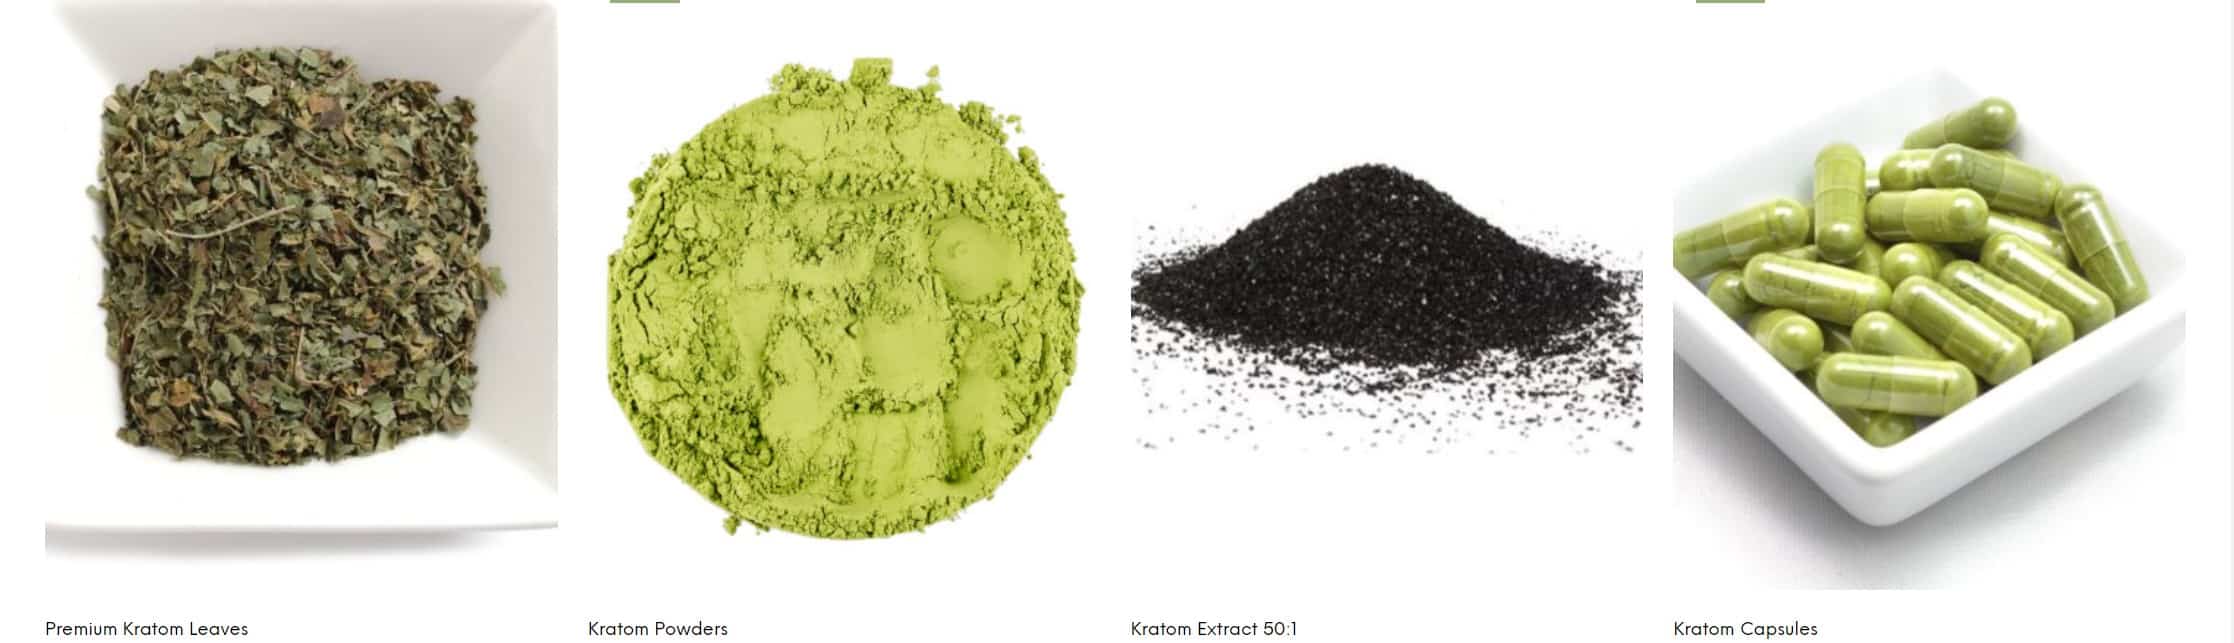 image of kratomforsale,us products review